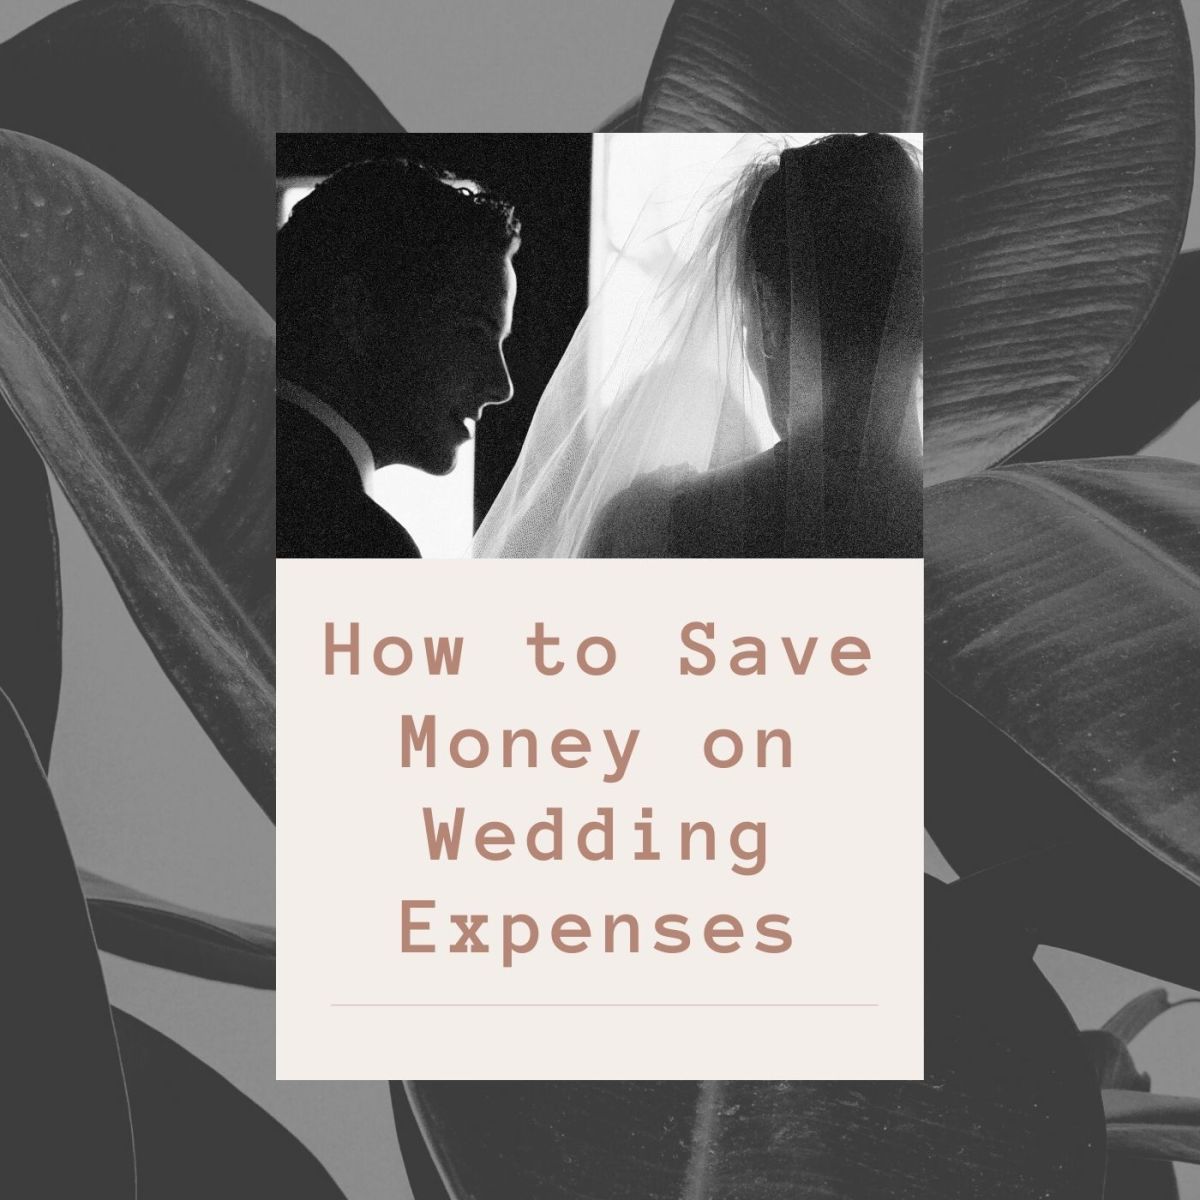 How to Save Money on Wedding Expenses